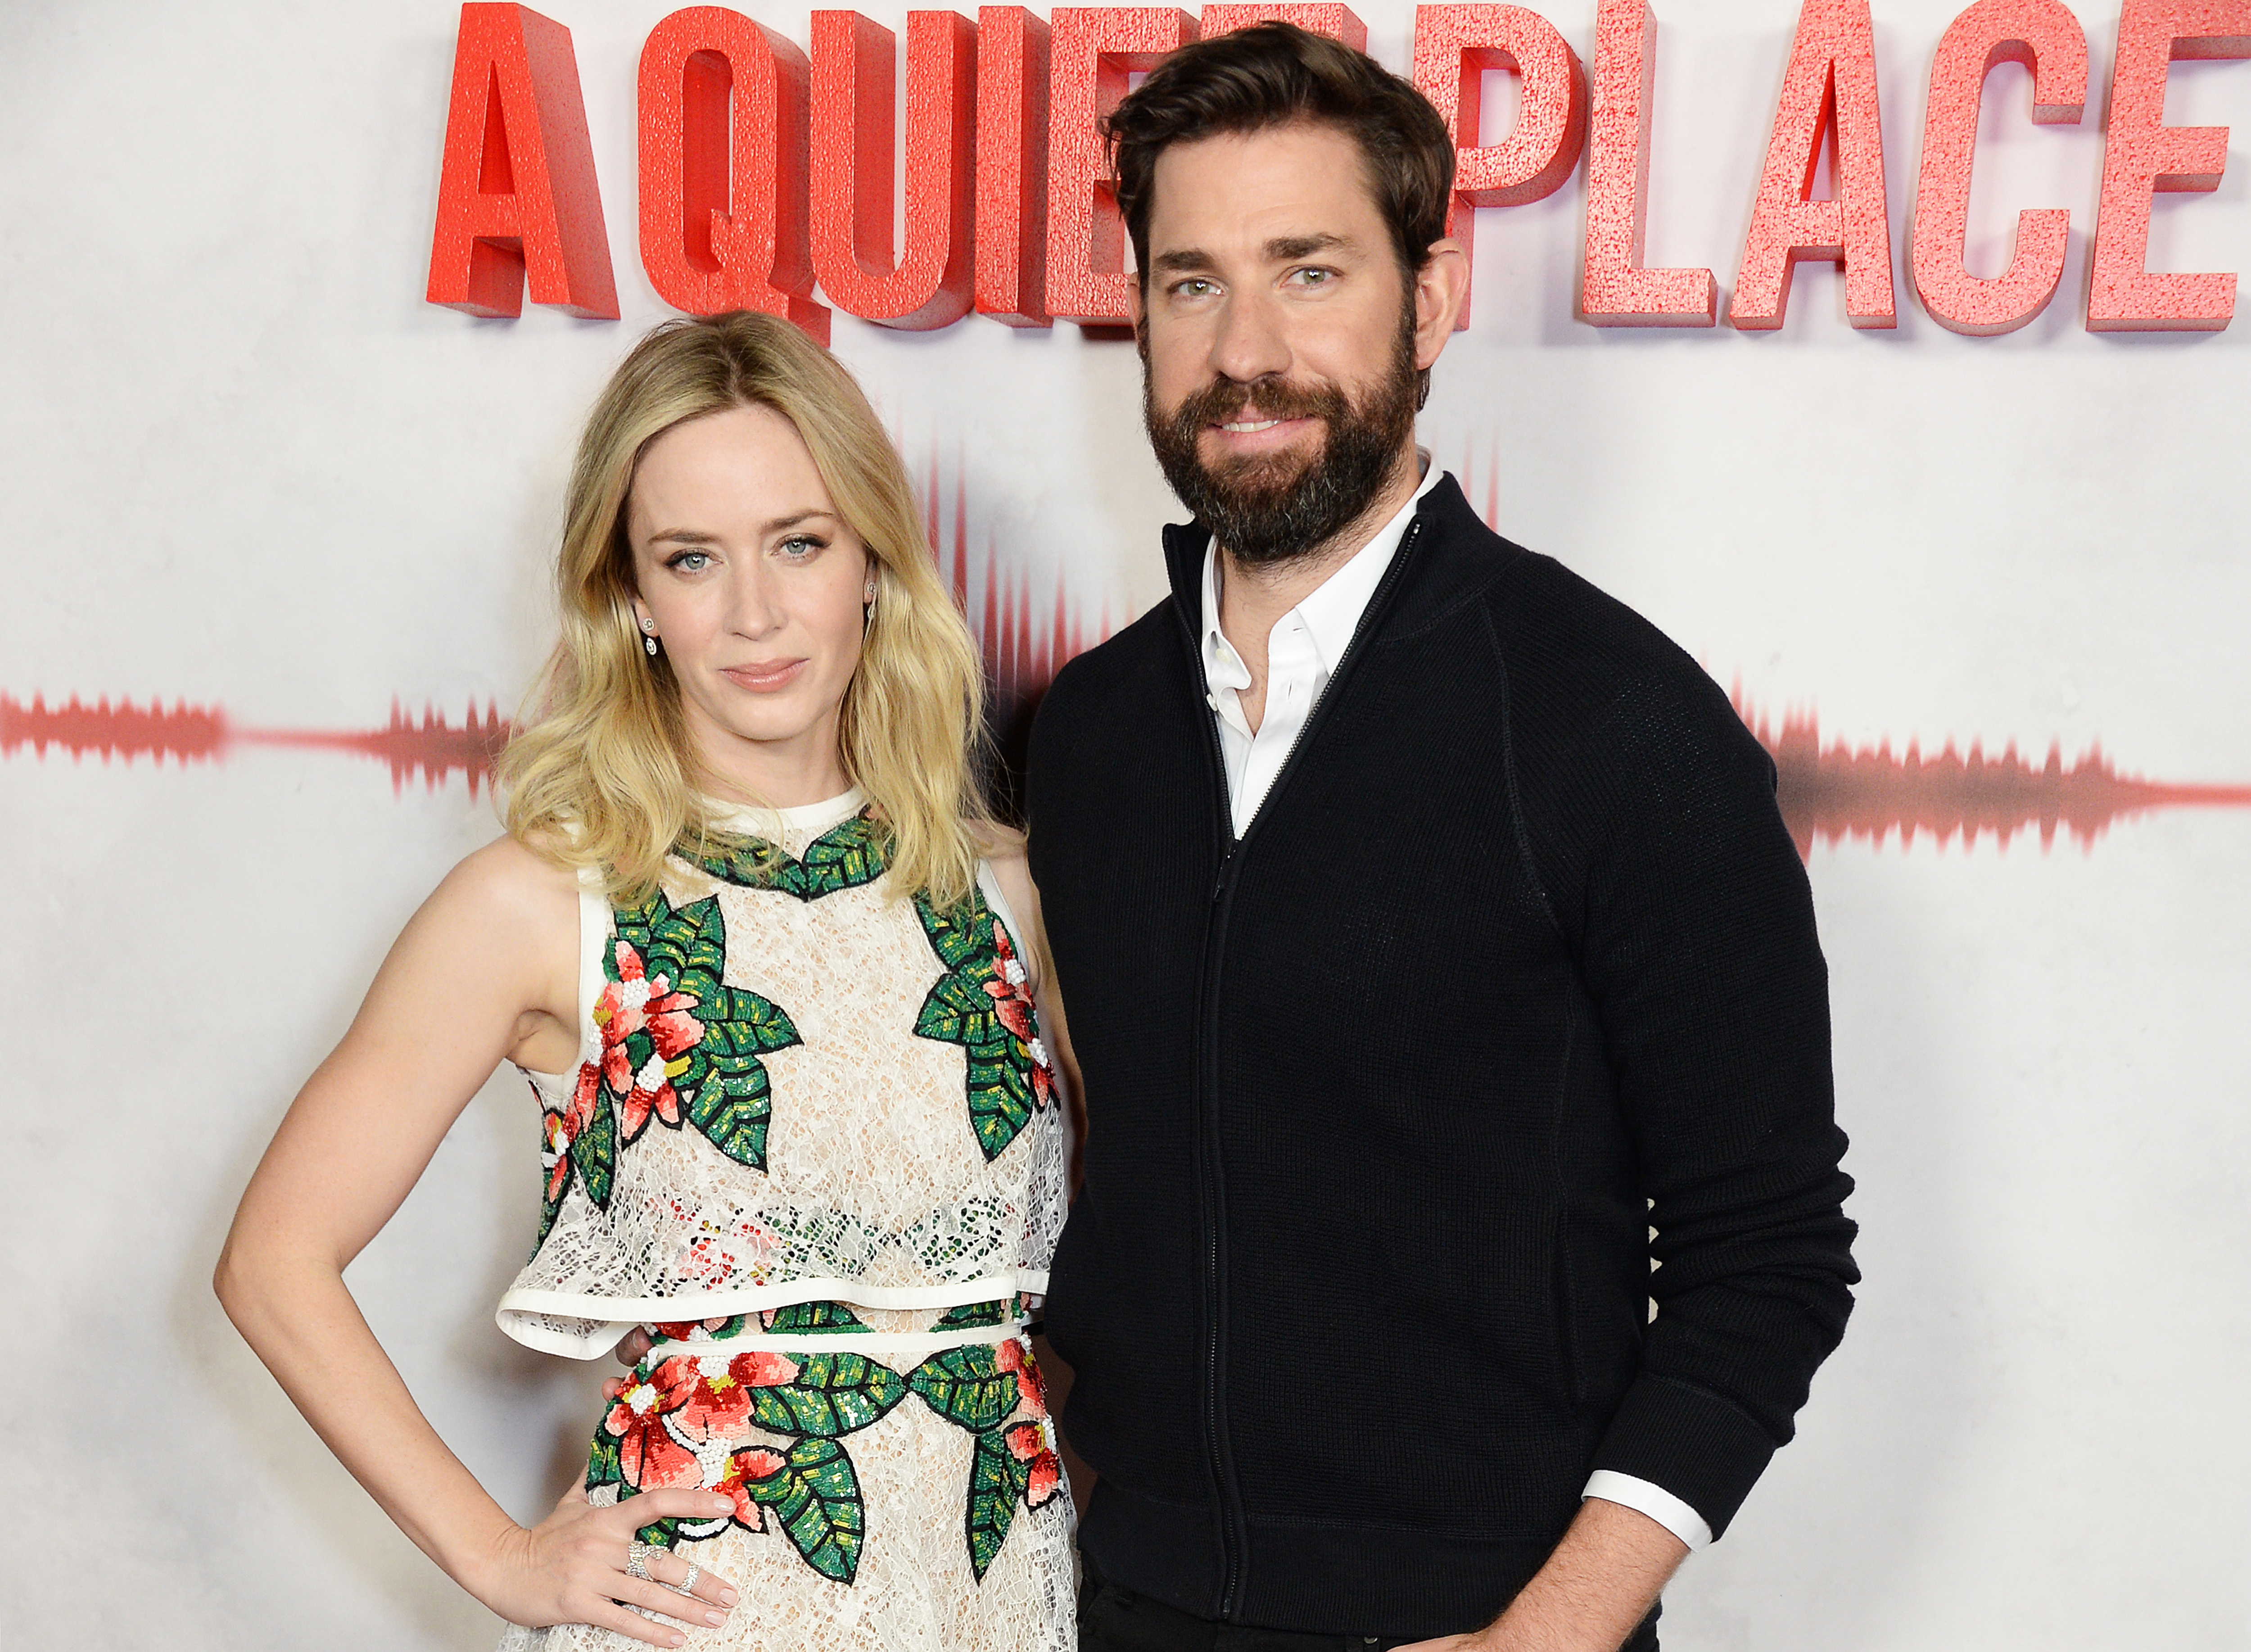 Emily Blunt and John Krasinski attend an immersive fan screening of "A Quiet Place" at The Curzon Soho in London, England, on April 5, 2018. | Source: Getty Images